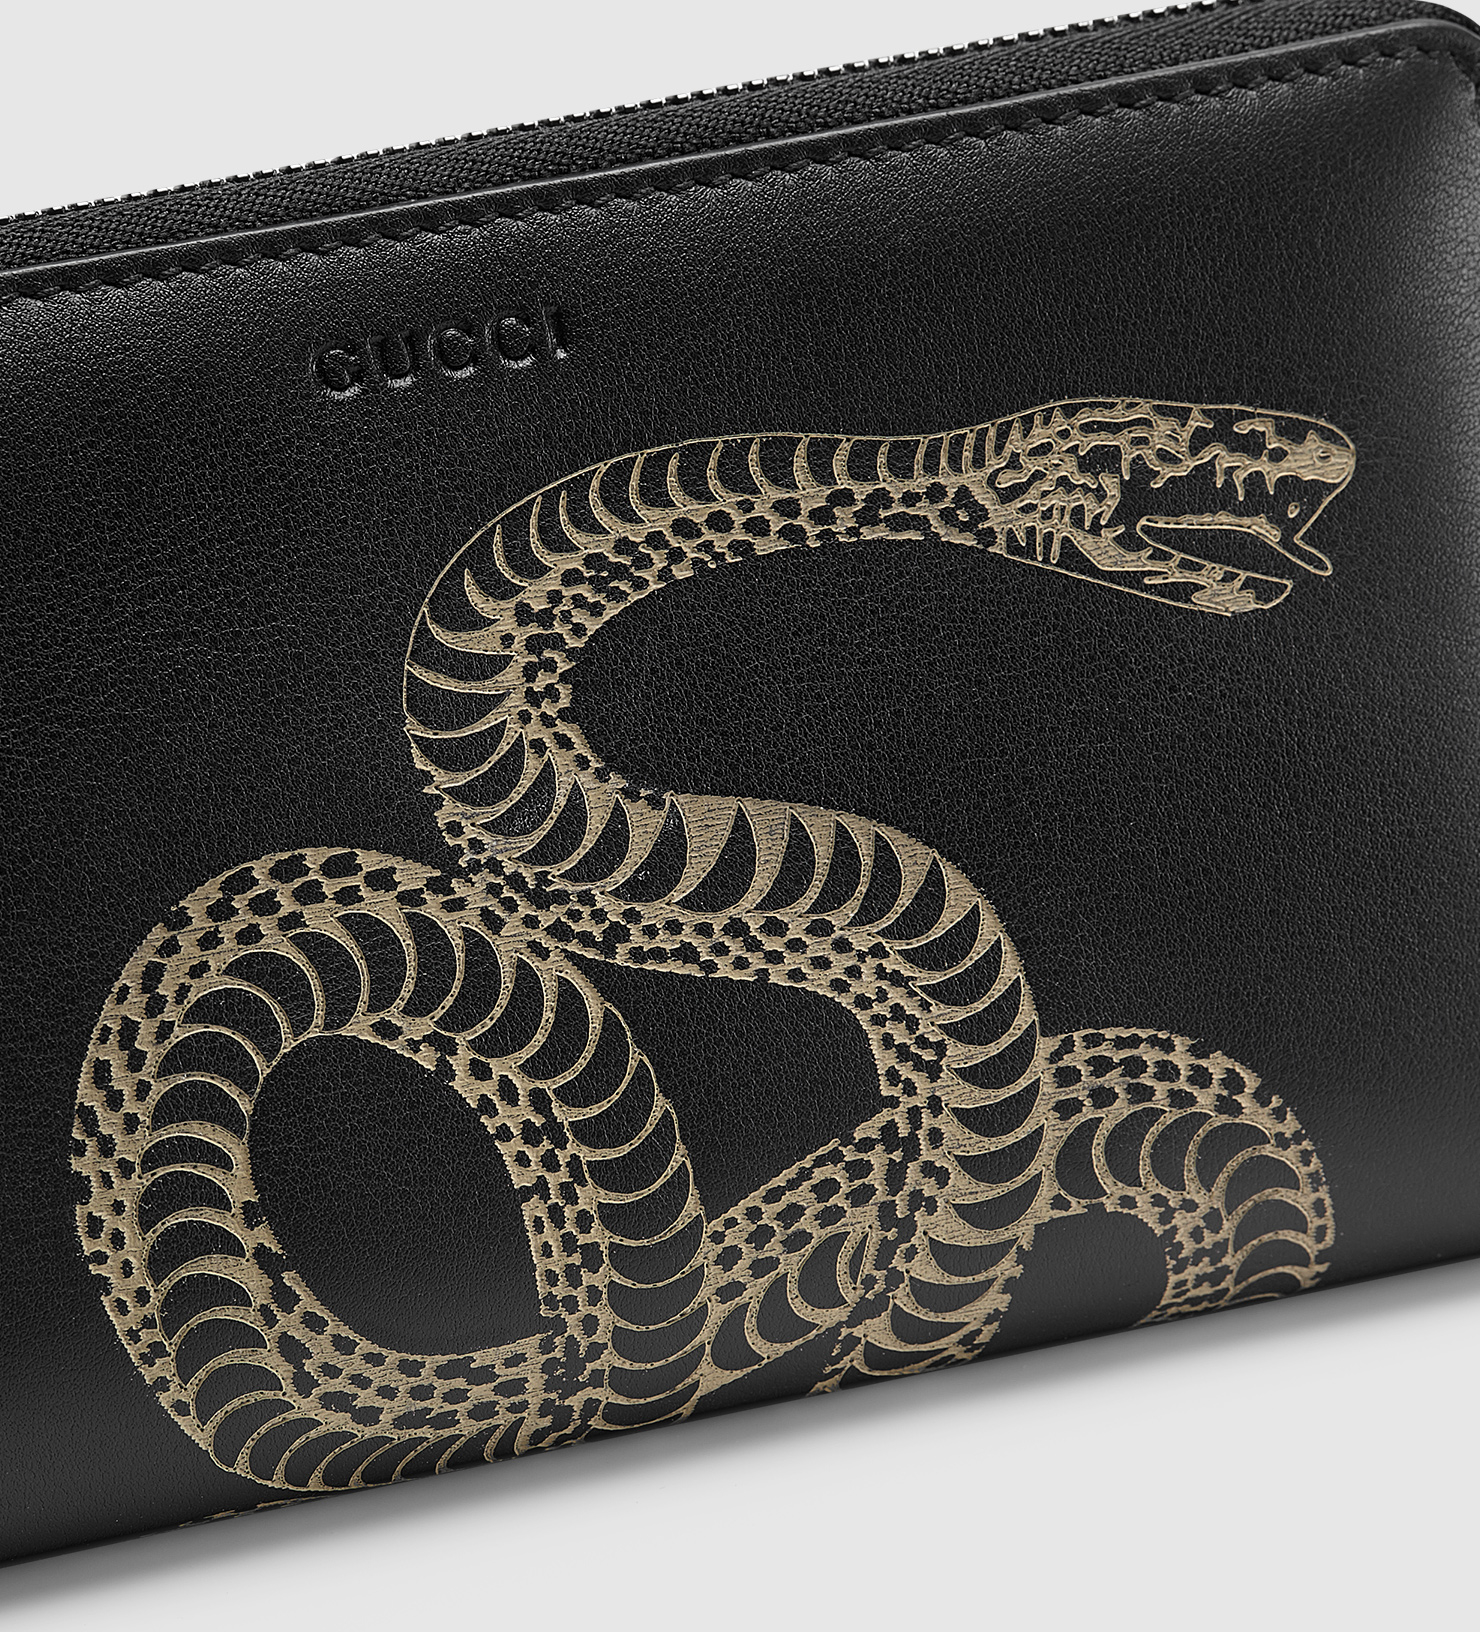 Lyst - Gucci Snake Leather Chain Wallet for Men